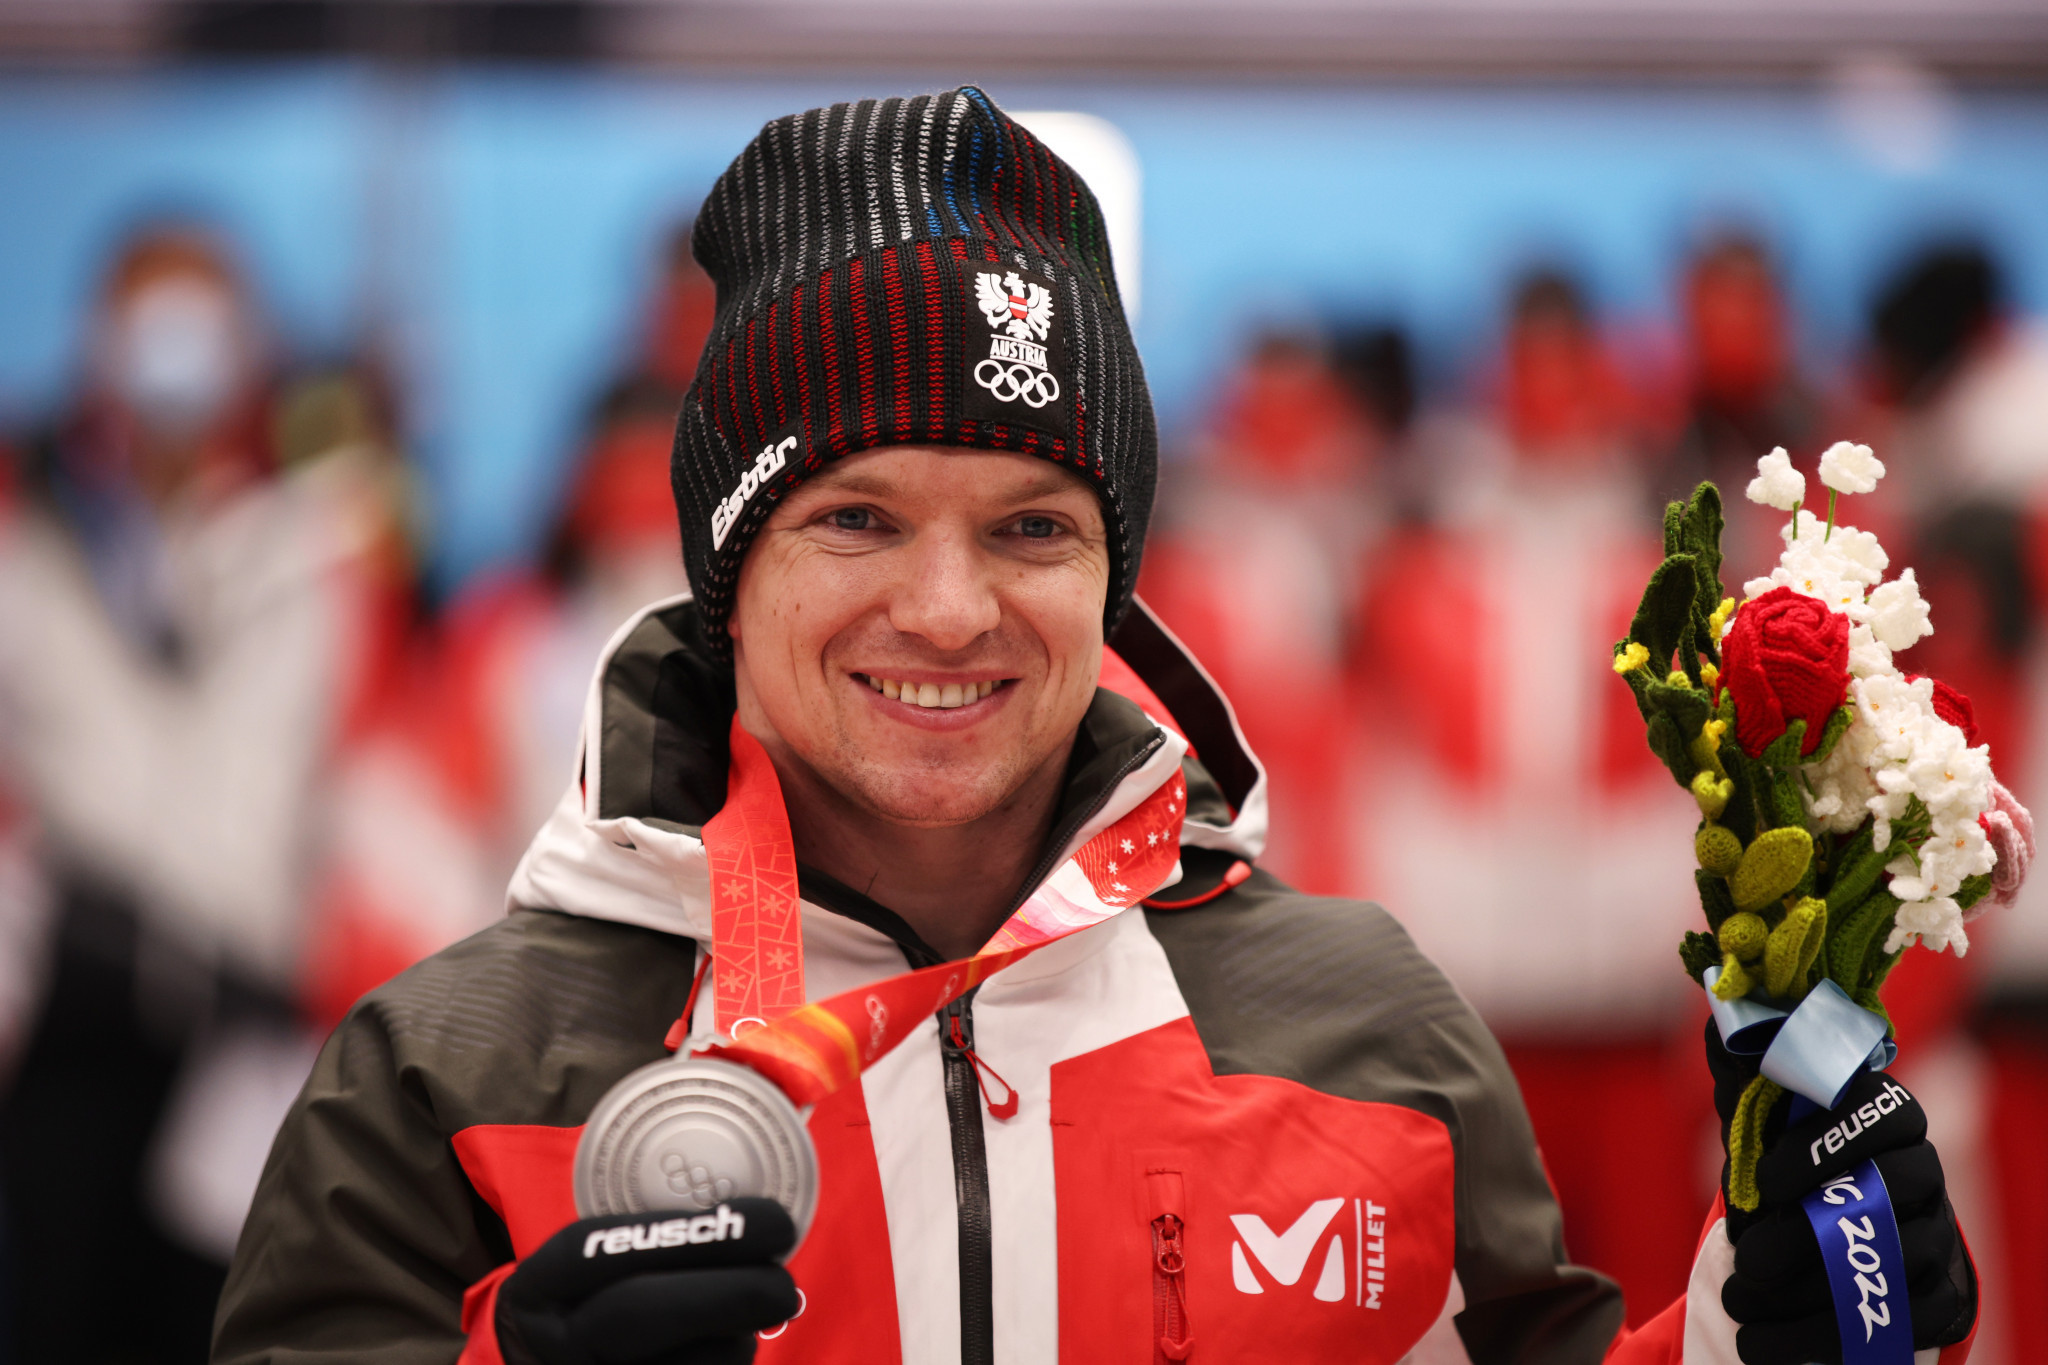 Wolfgang Kindl won two silver medals in luge at Beijing 2022 ©Getty Images